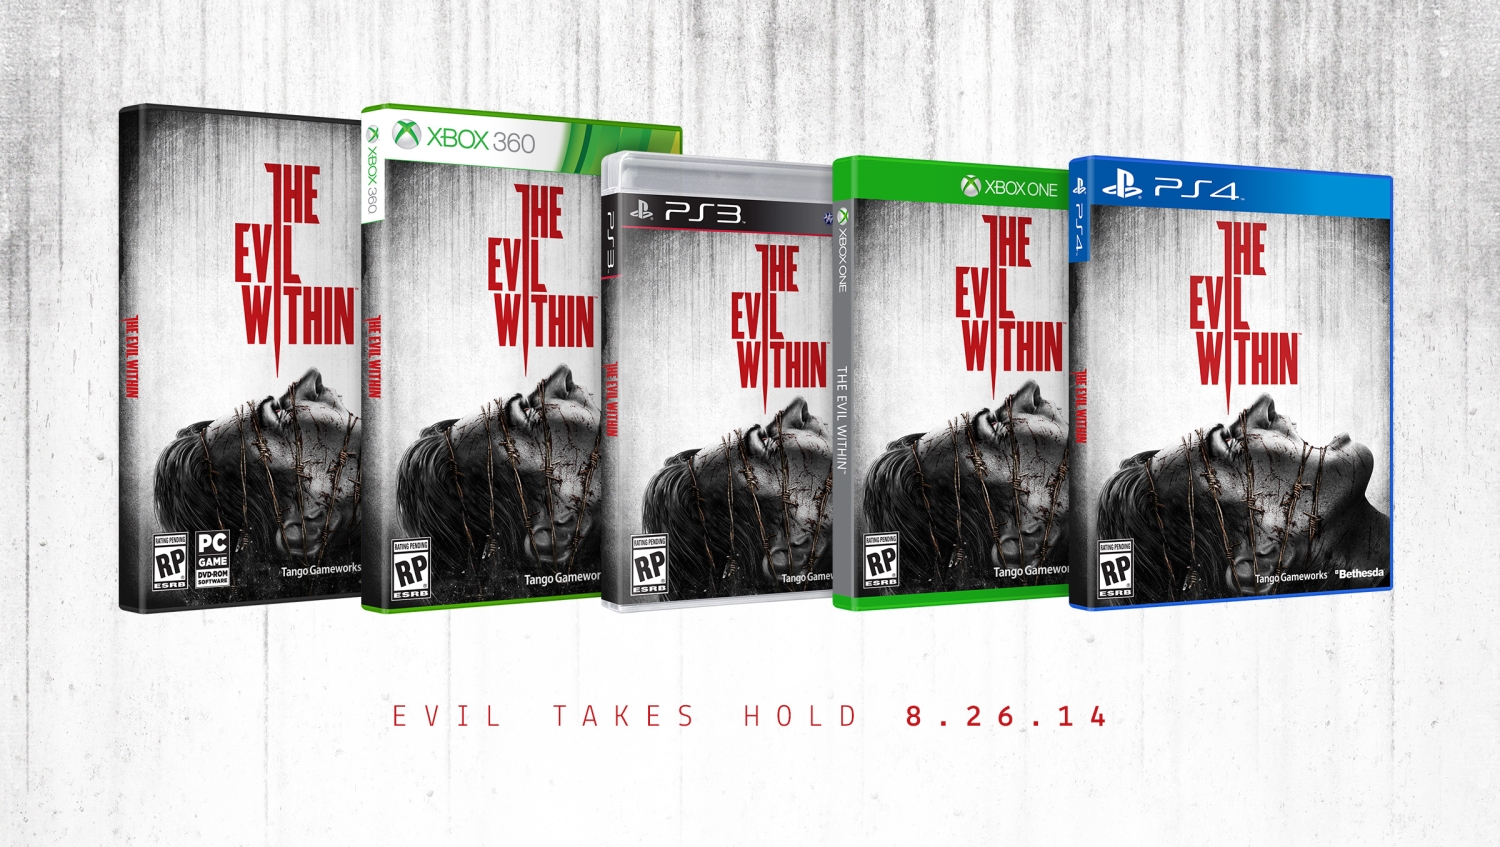 The Evil Within is Set for August